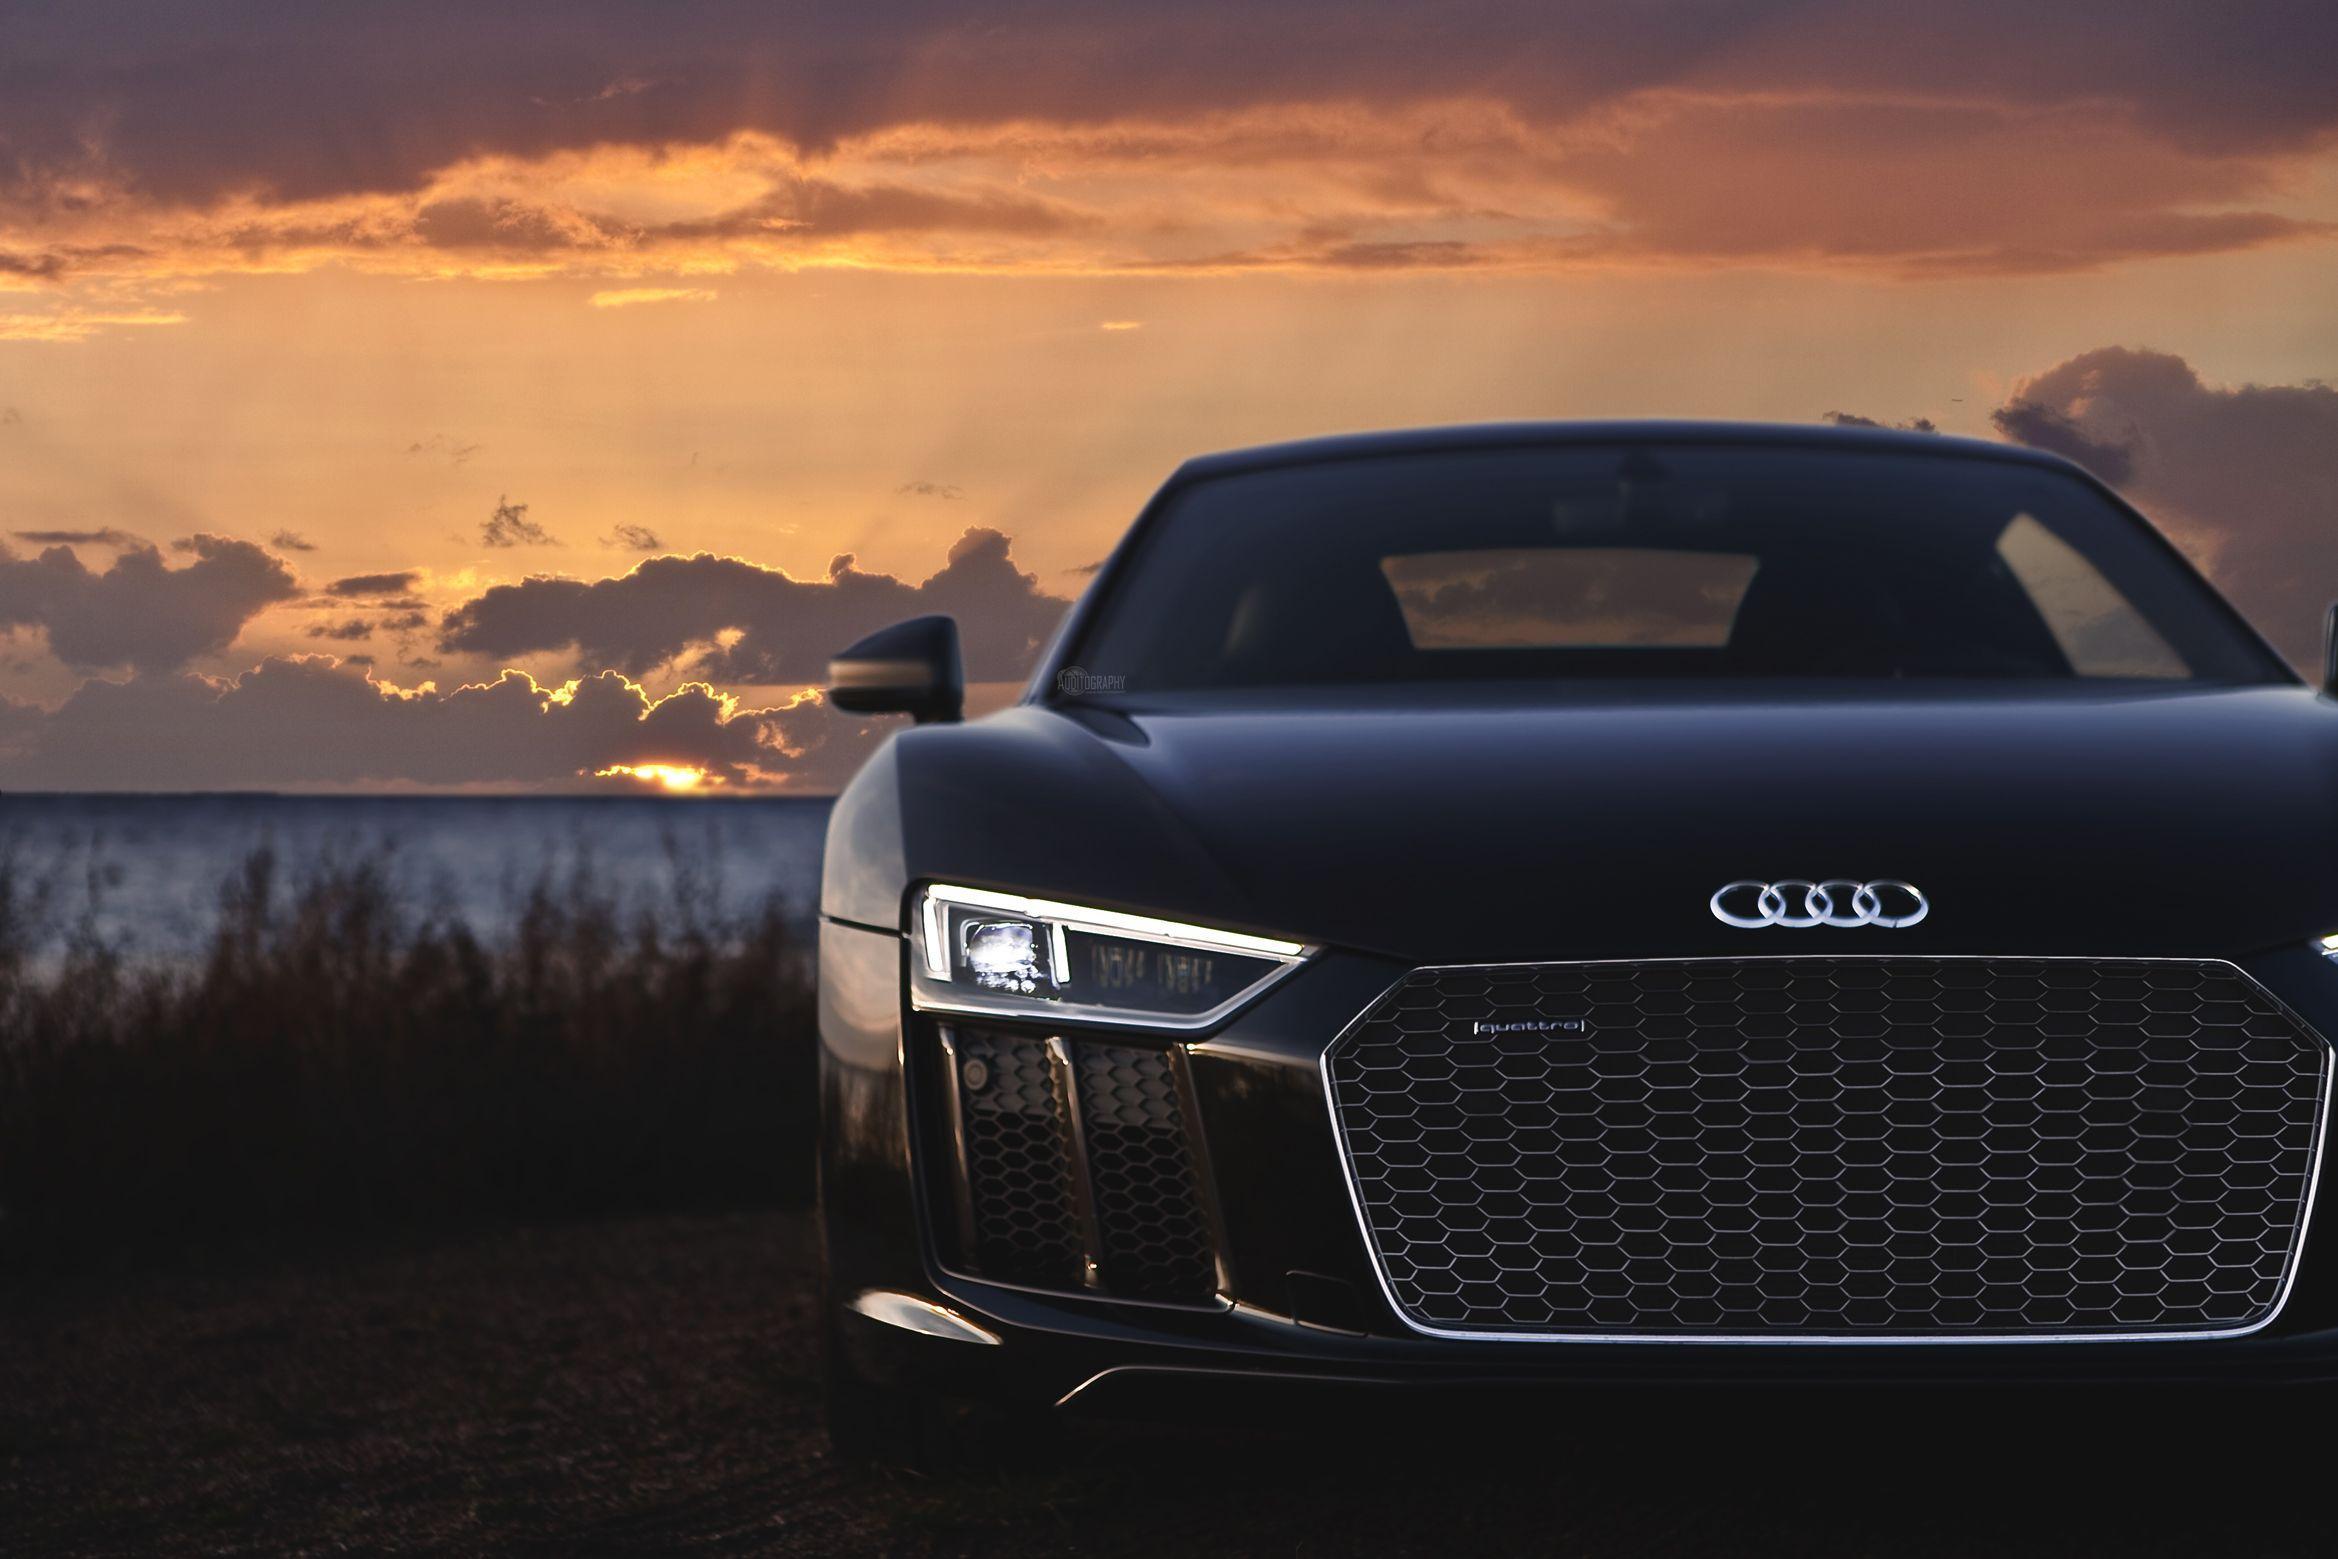 Awesome Wallpaper Of Audi R8 And Information